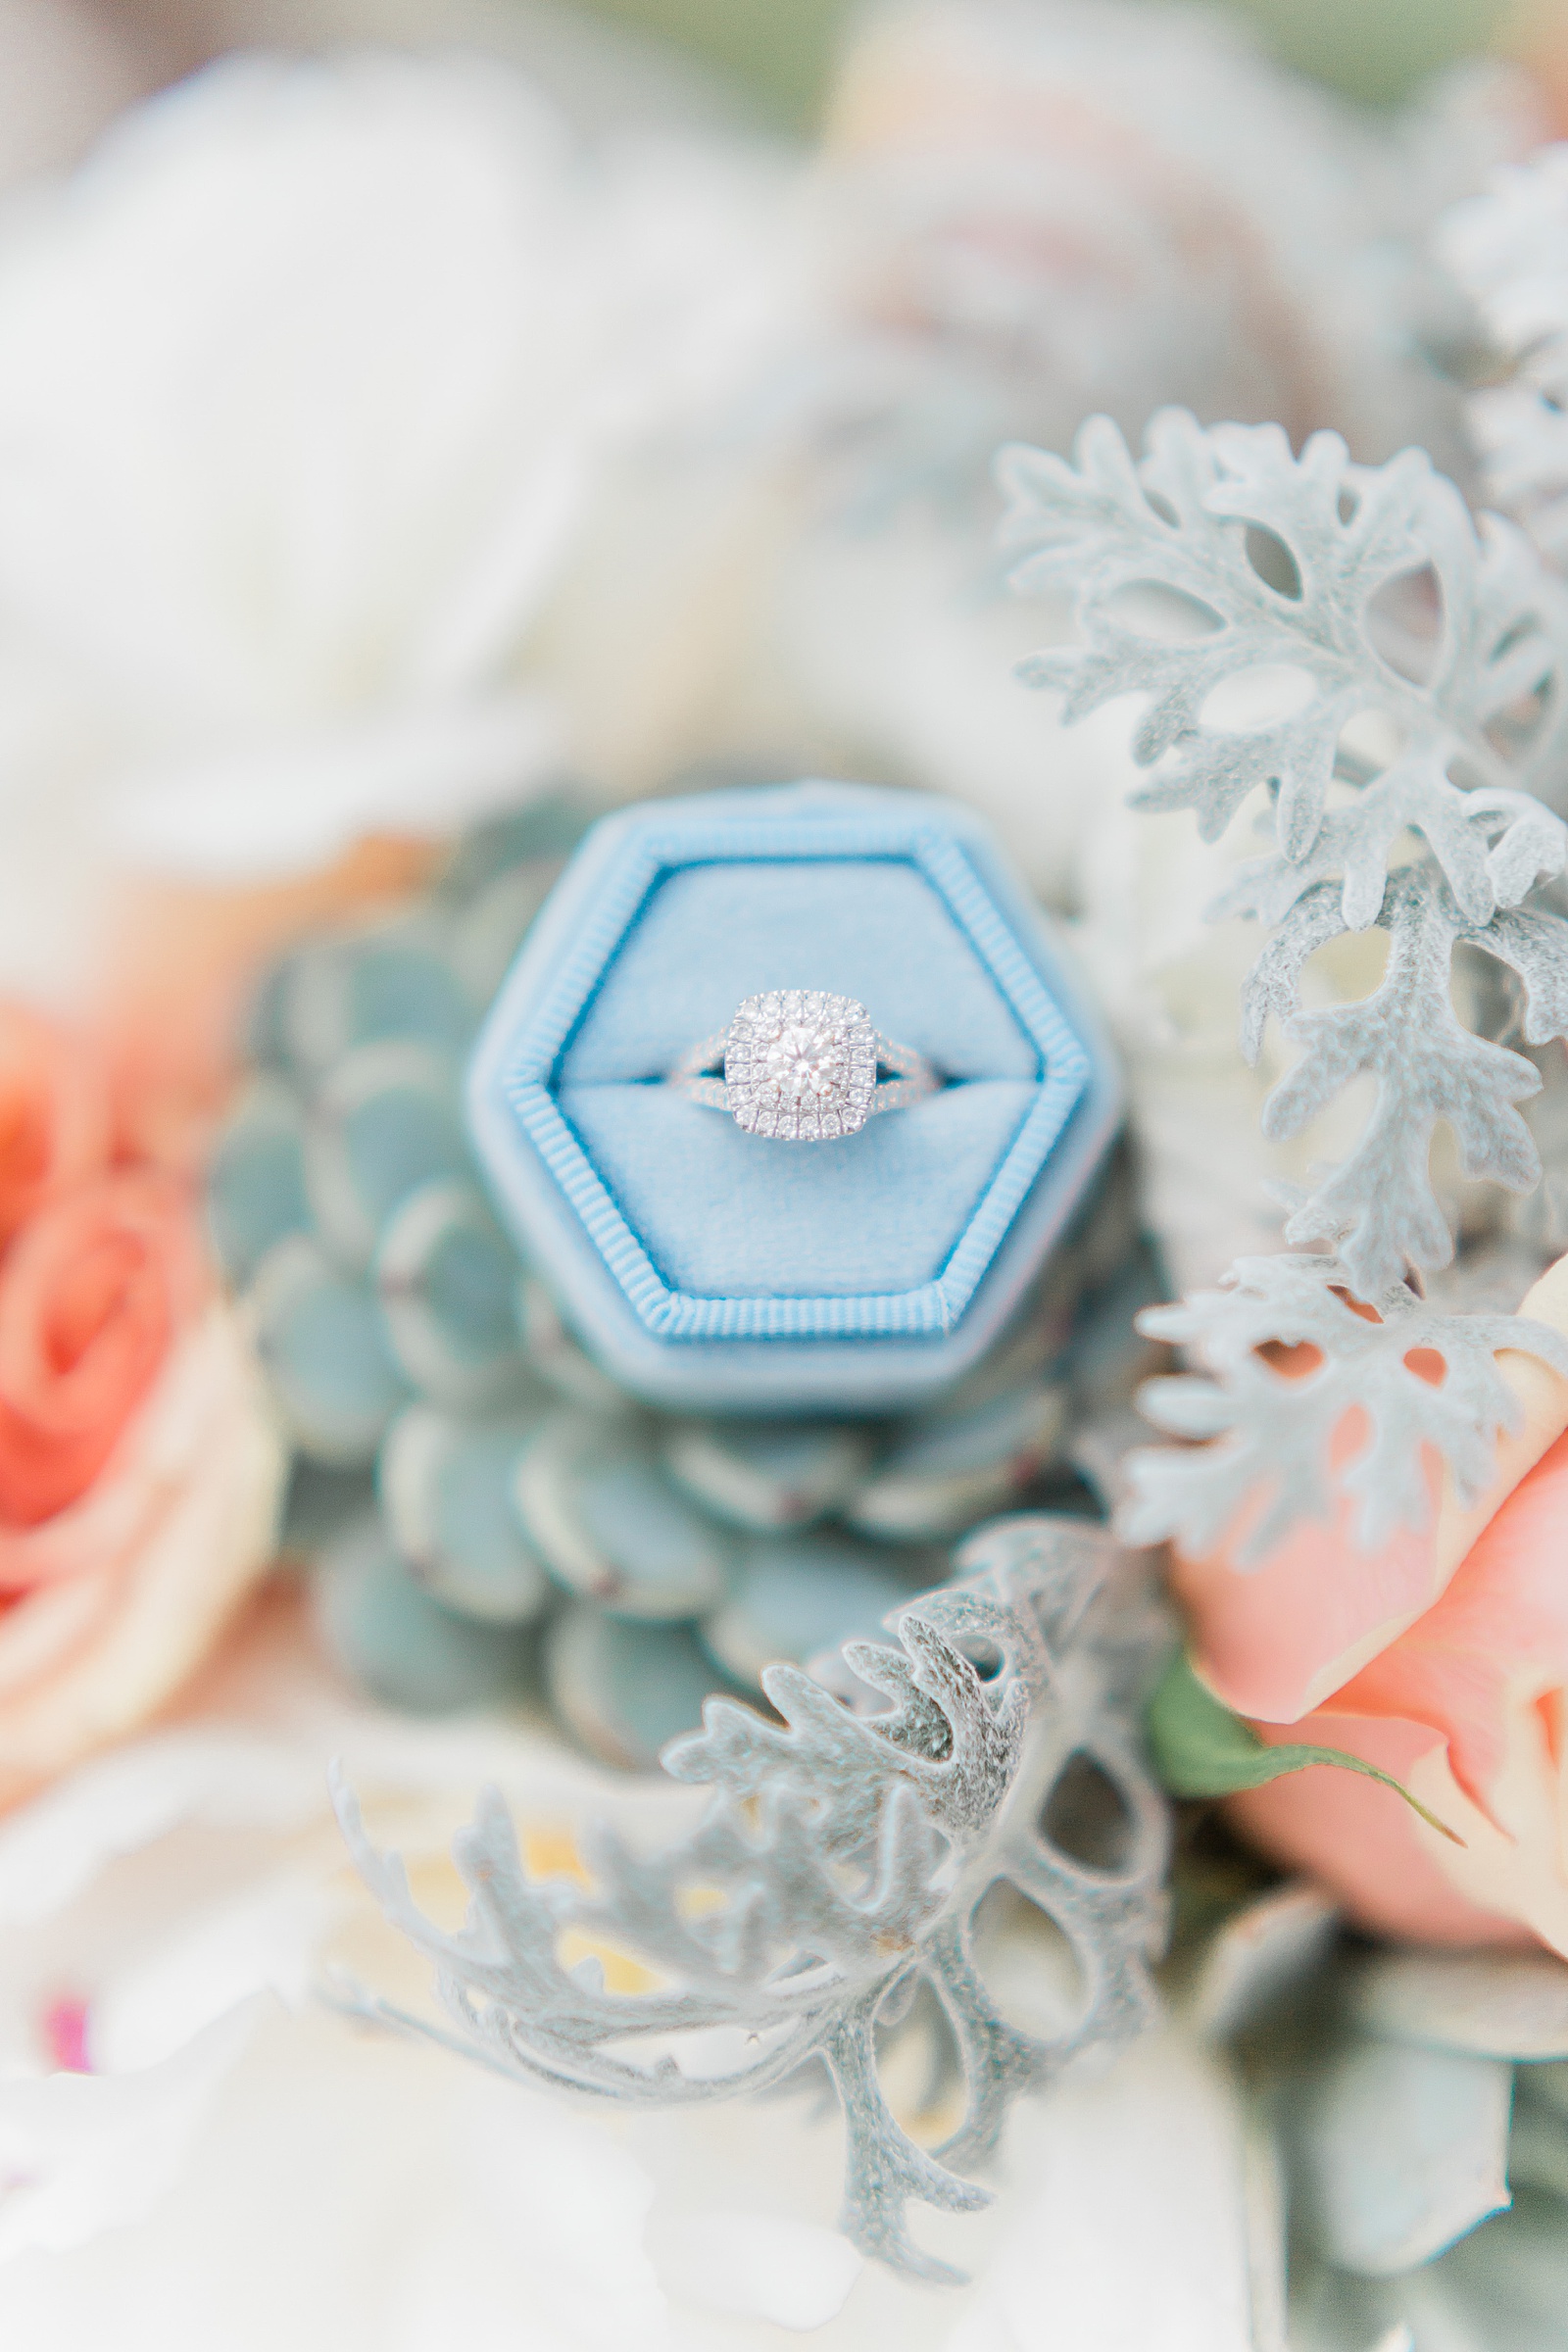 Engagement Ring in Succulents, Anna Kay Photography, Destination Wedding Photographer